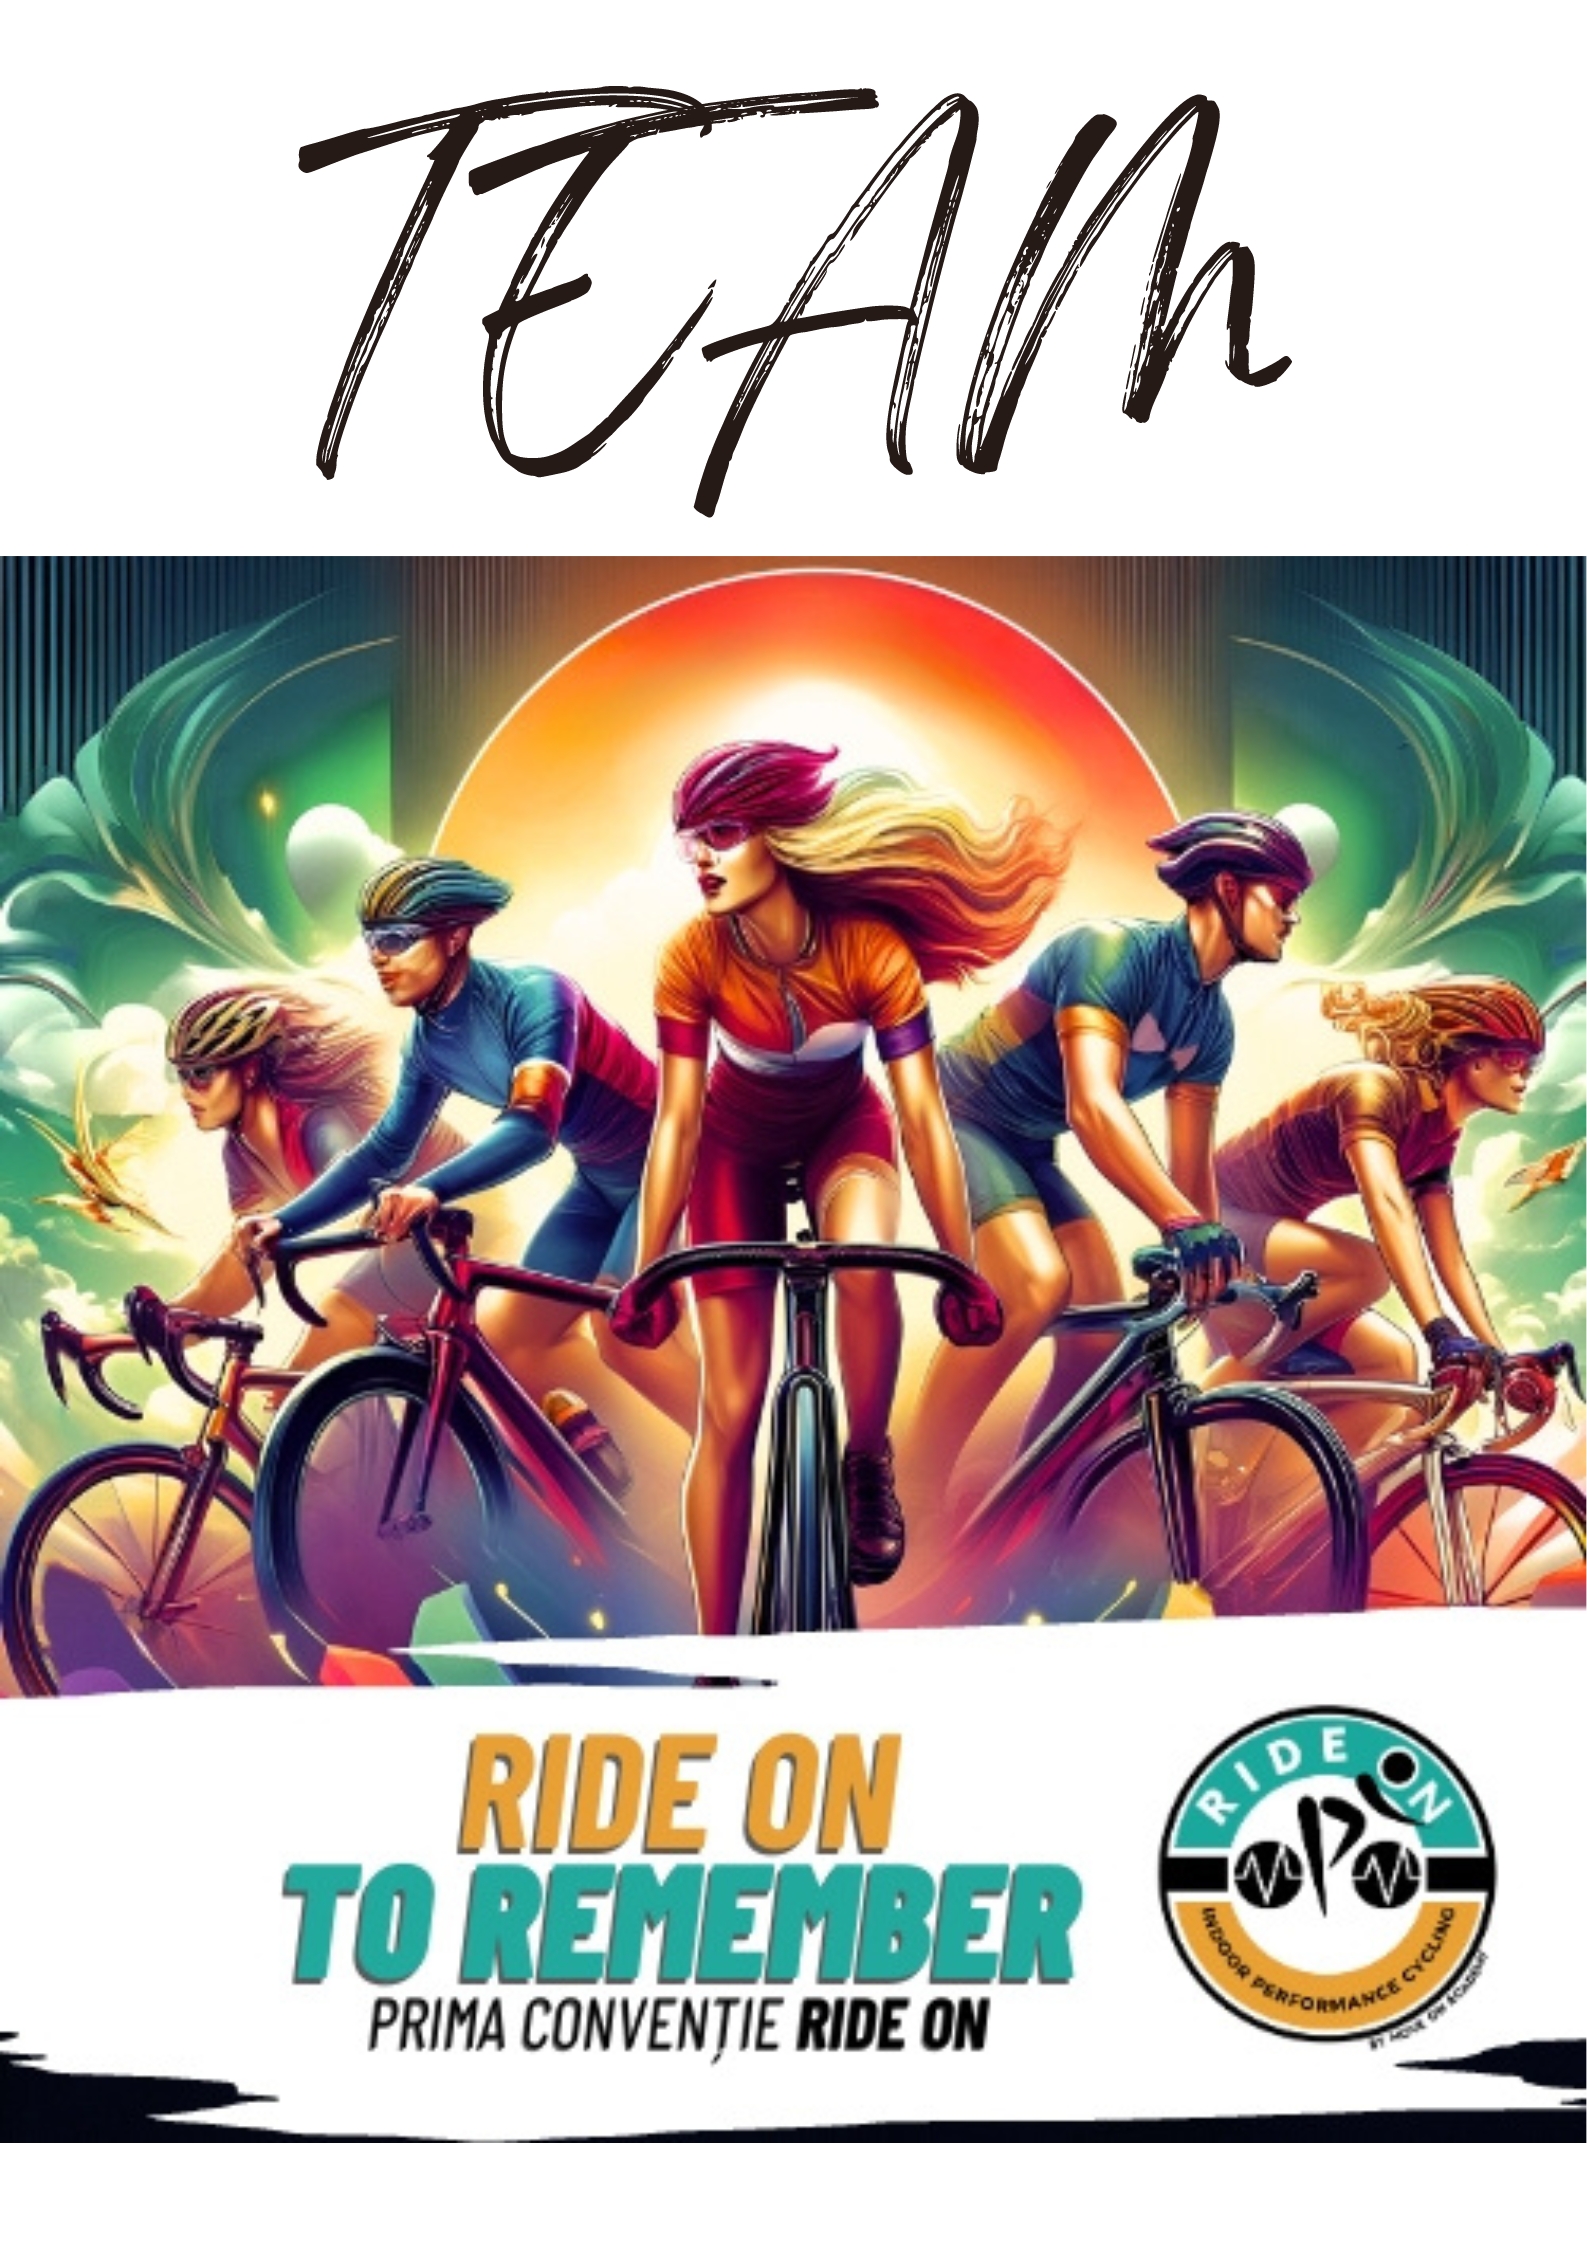 RIDE ON TO REMEMBER TEAM